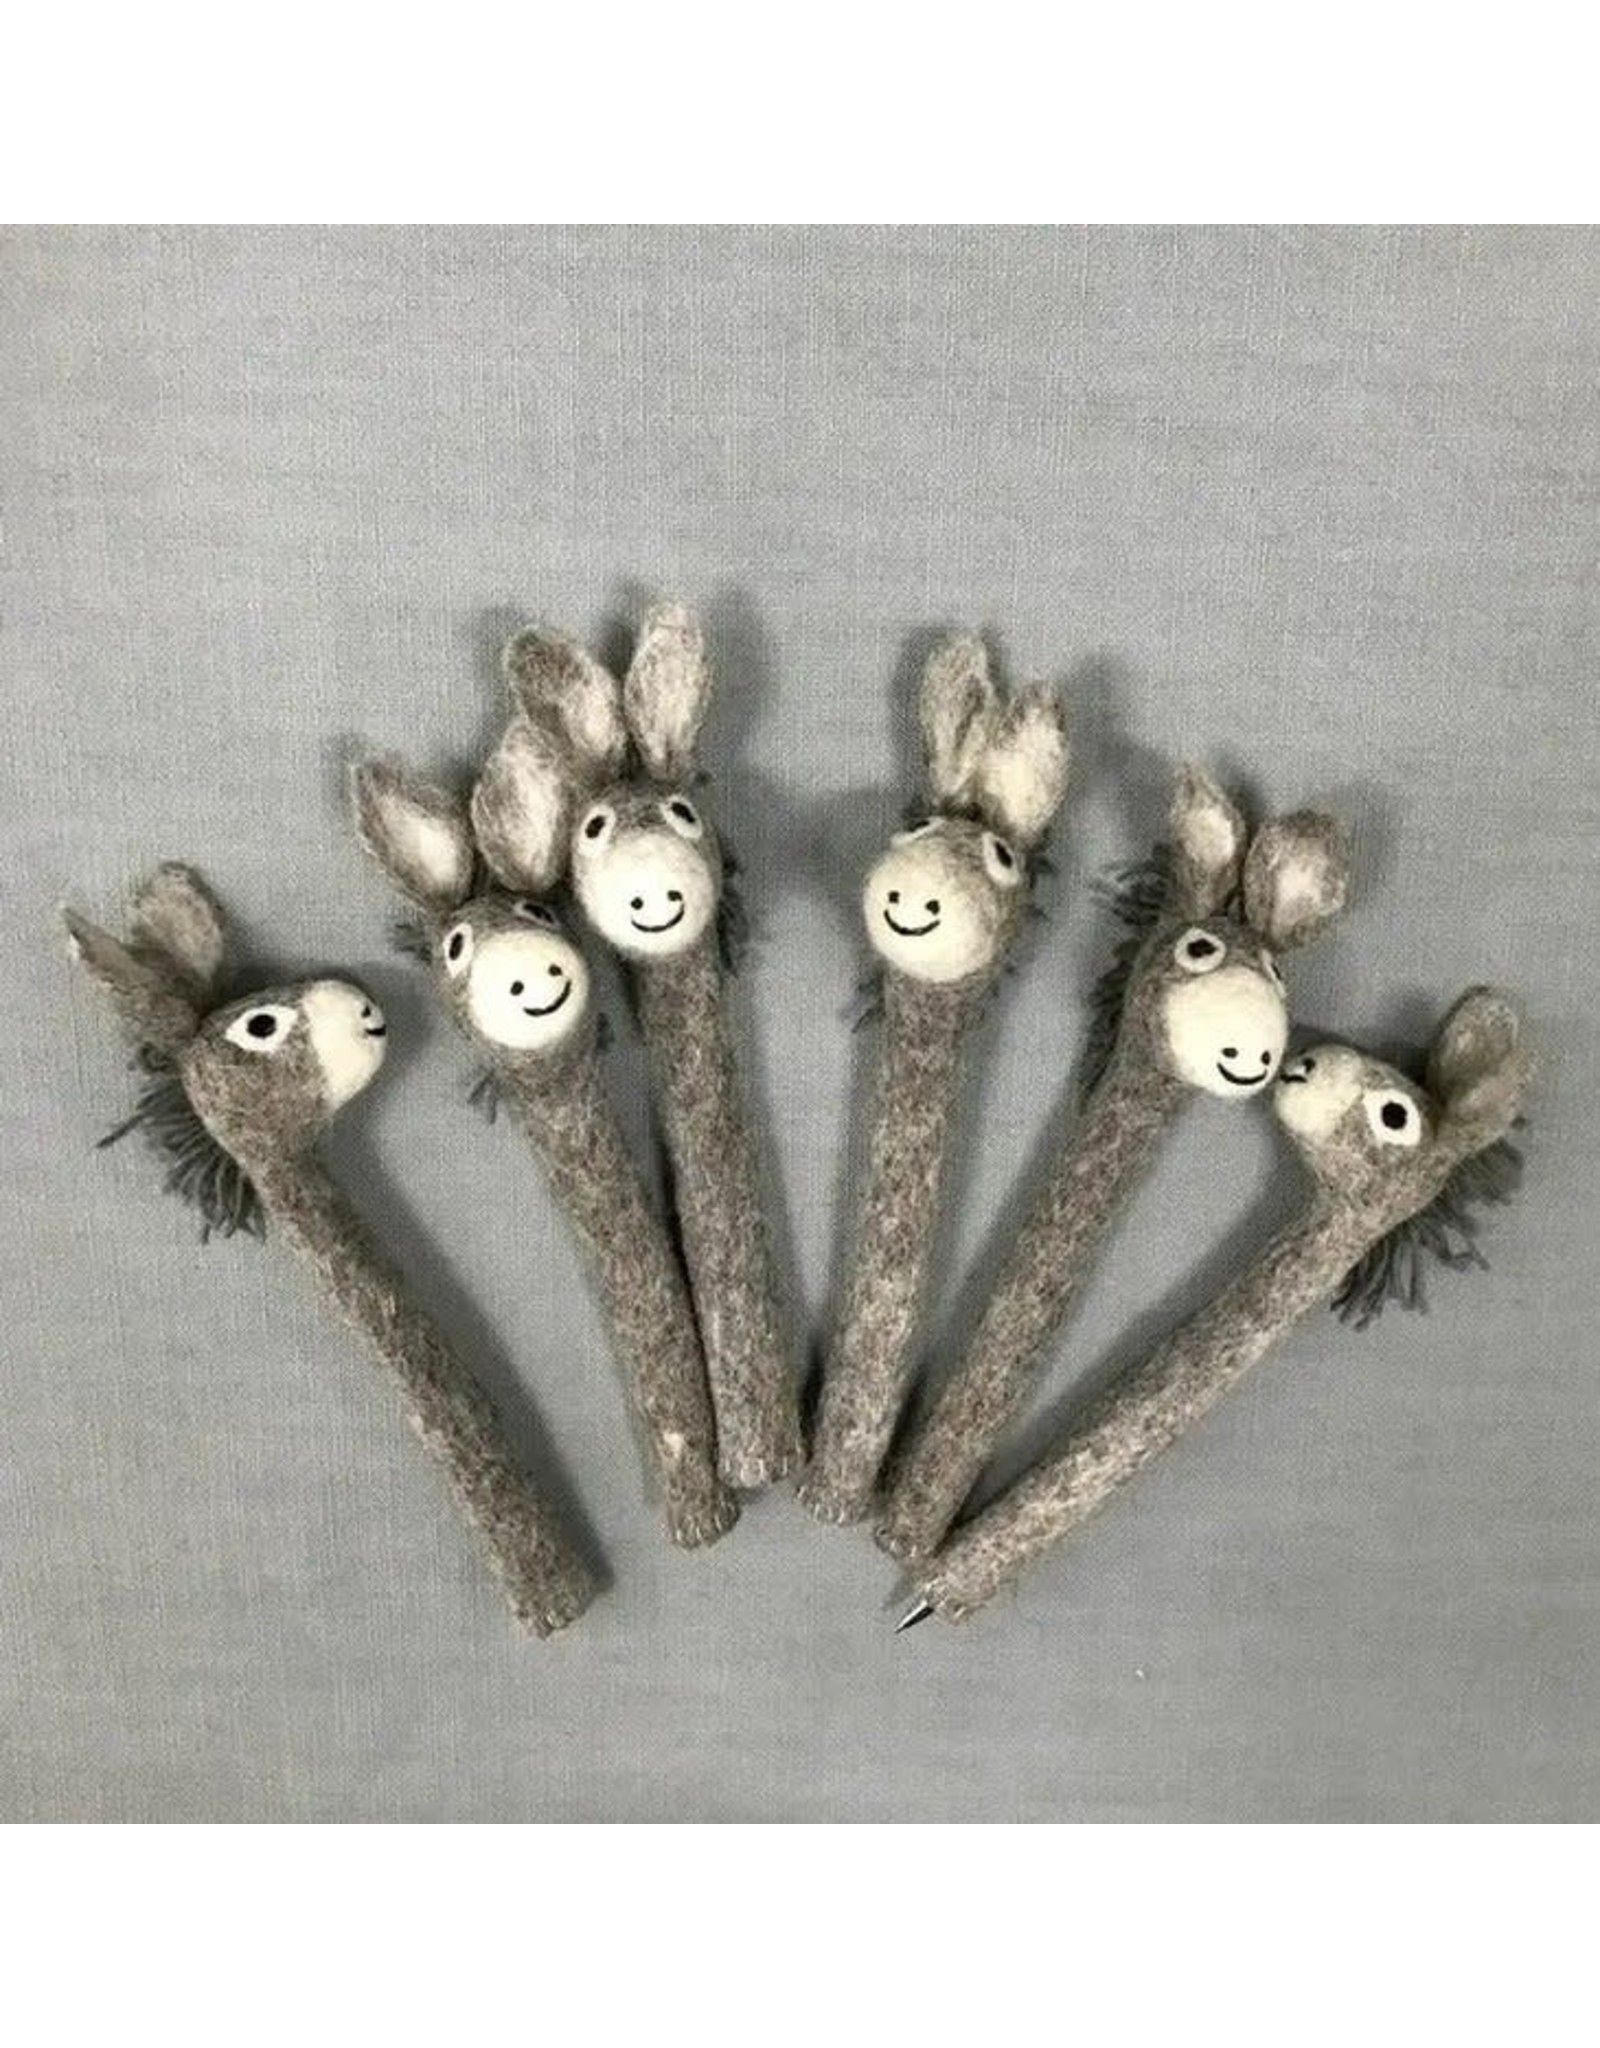 Assorted Felt Animal Pencil Toppers, Nepal